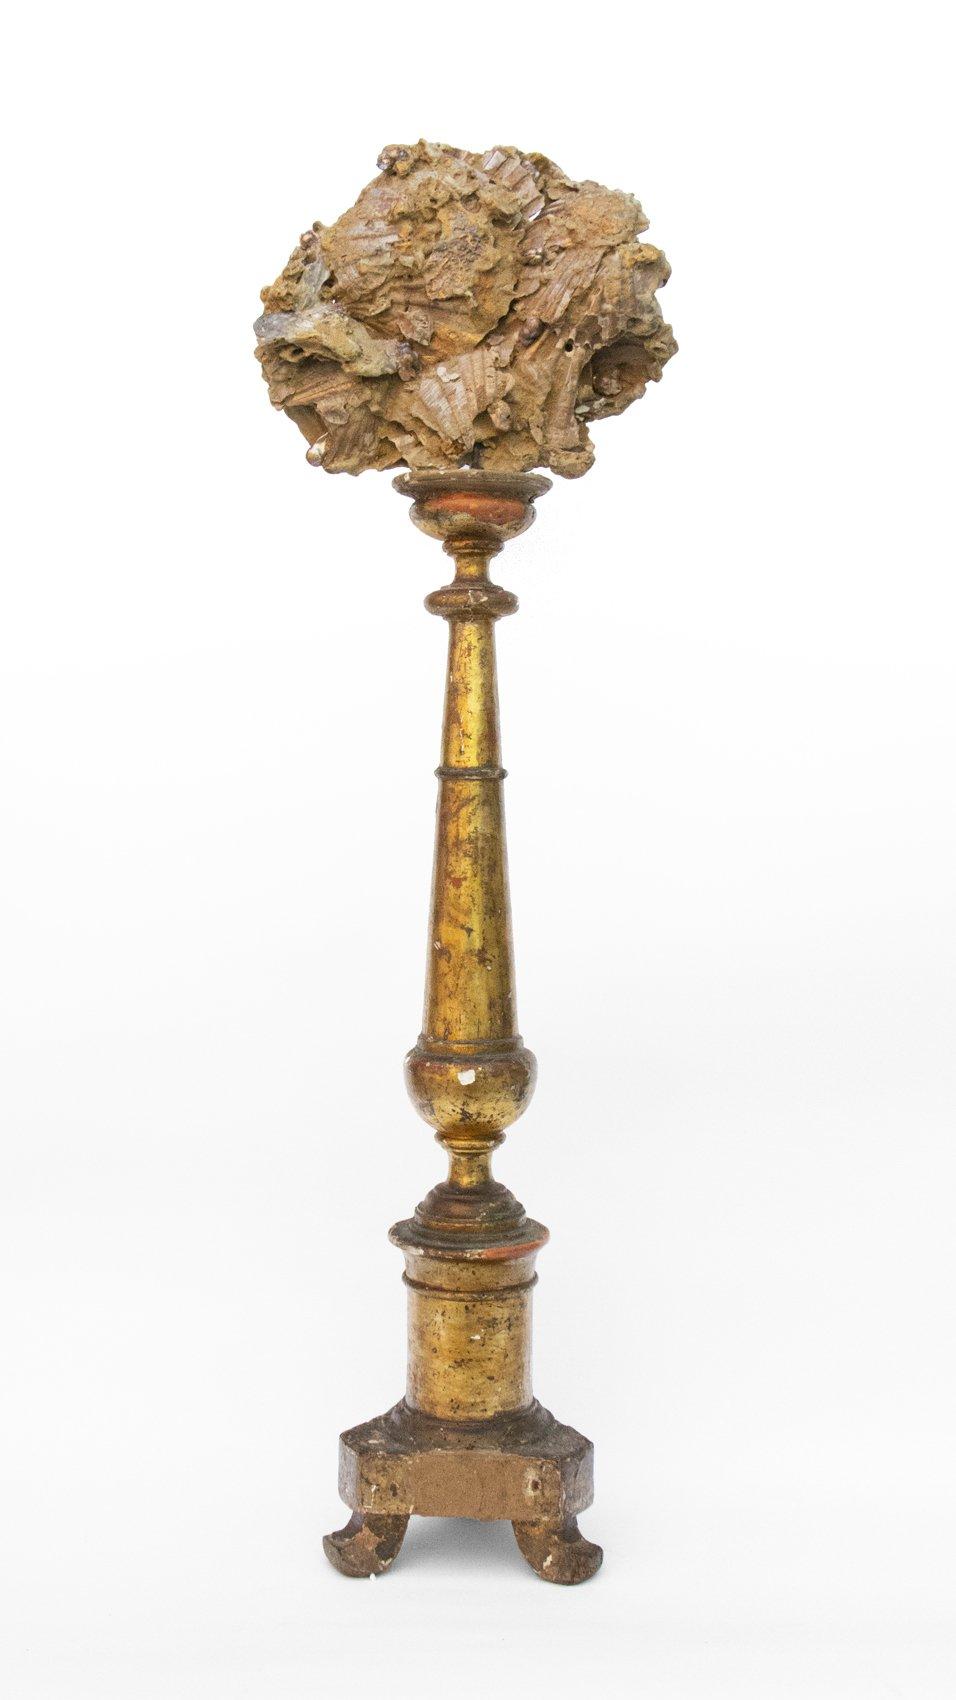 18th century Italian gold leaf altar stick with a Chesapecten plated fossil scallop shell and natural forming Baroque pearls. 

The Chesapecten plated fossil scallop shell is hand-pulled from the banks of the James River. It is said to be about 3